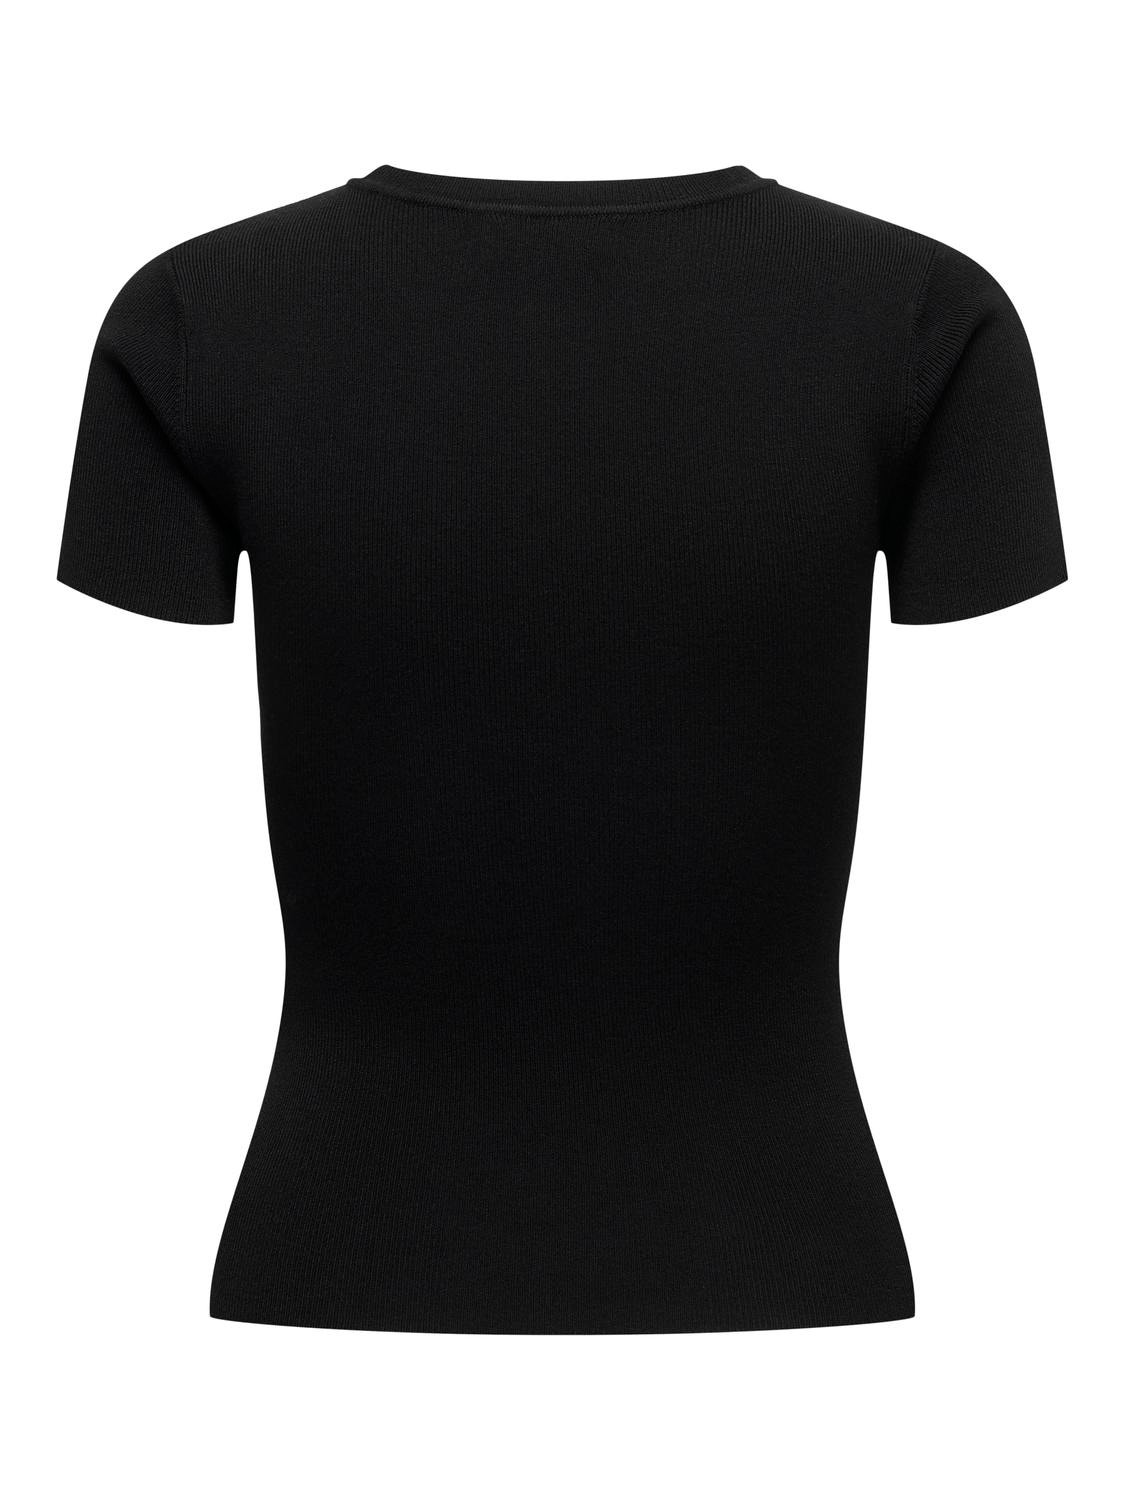 ONLY O-NECK TOP WITH SHORT SLEEVES -Black - 15307860